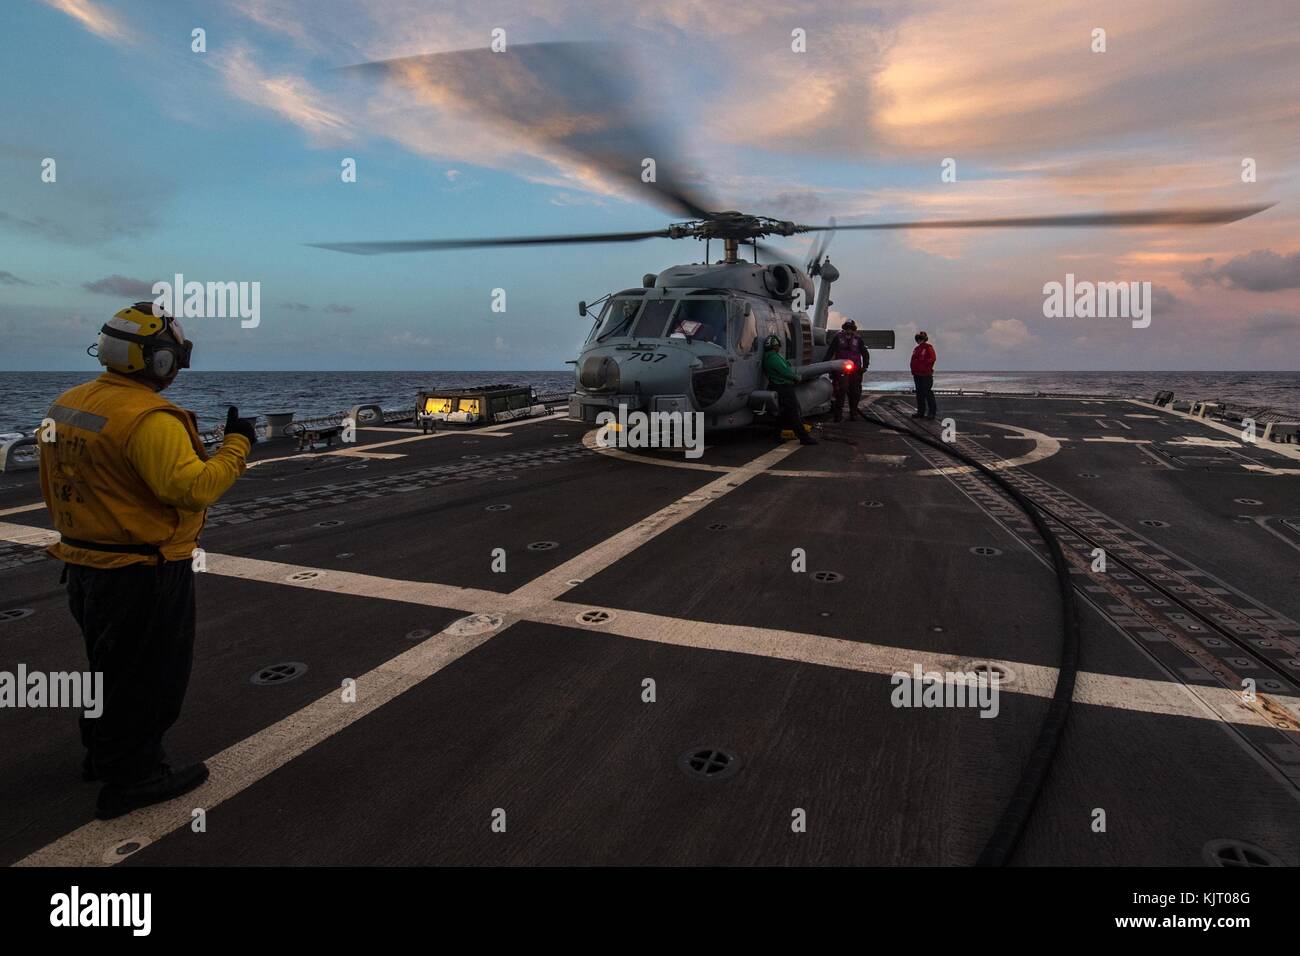 A U.S. Navy MH-60R Seahawk helicopter lands aboard the U.S. Navy Arleigh Burke-class guided-missile destroyer USS Halsey November 17, 2017 in the Philippine Sea.  (photo by Nicholas Burgains via Planetpix) Stock Photo